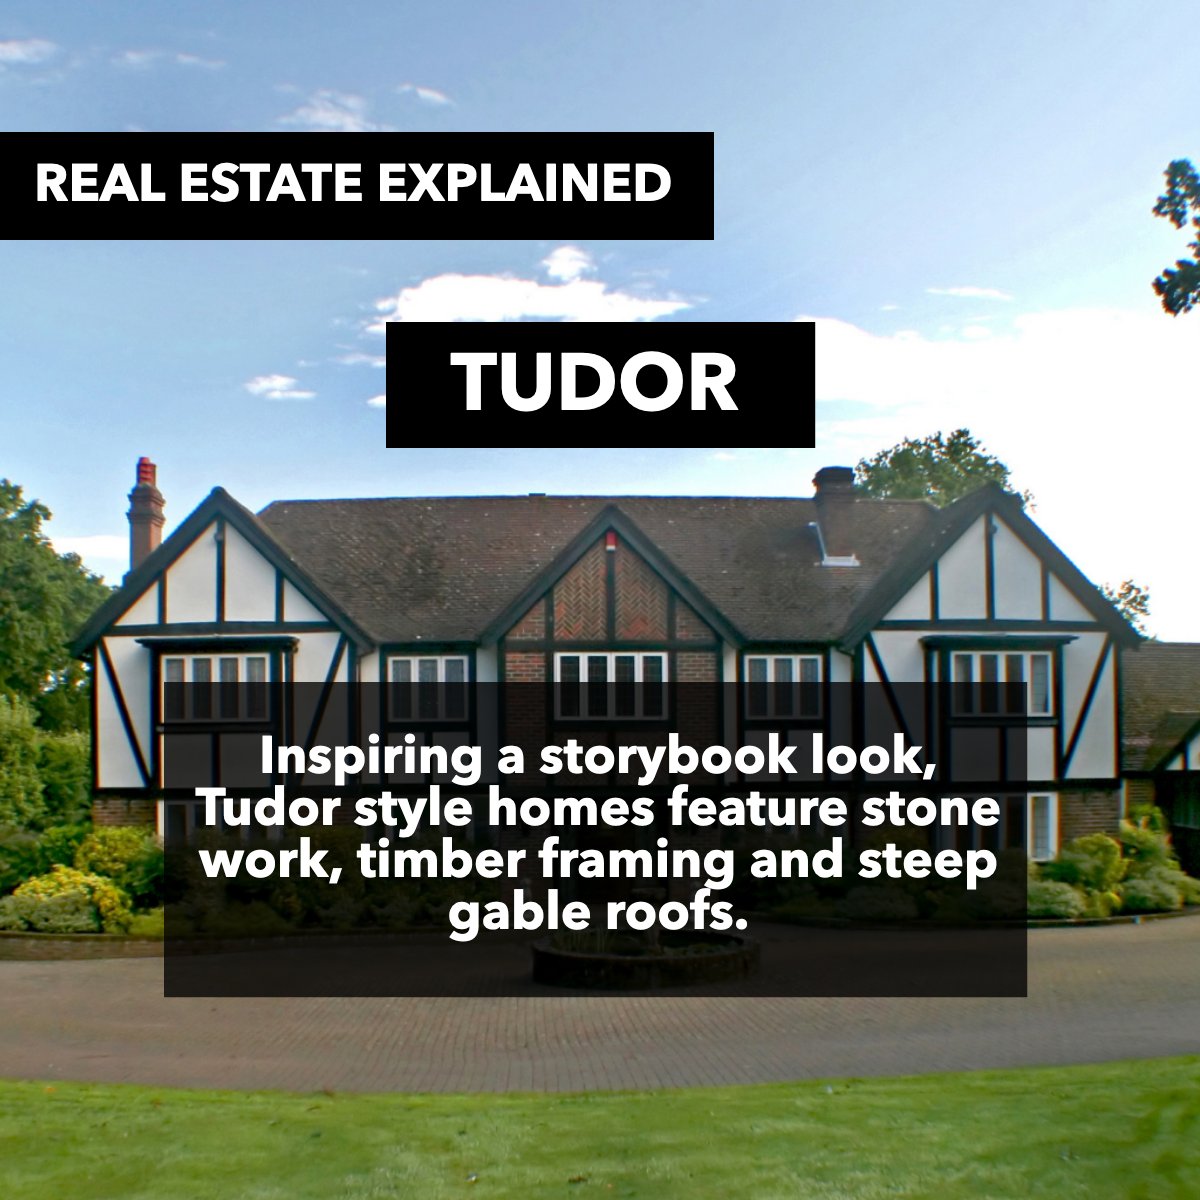 Charming, intricate, and classic, Tudor-style homes have been an iconic home style in North America since the 19th century. 🏘️

#tudorstylearchitecture #tudorstylehome #styletudors
 #veteranhomebuyers #militaryhomebuyers #veteransellinghome #militarysellinghome